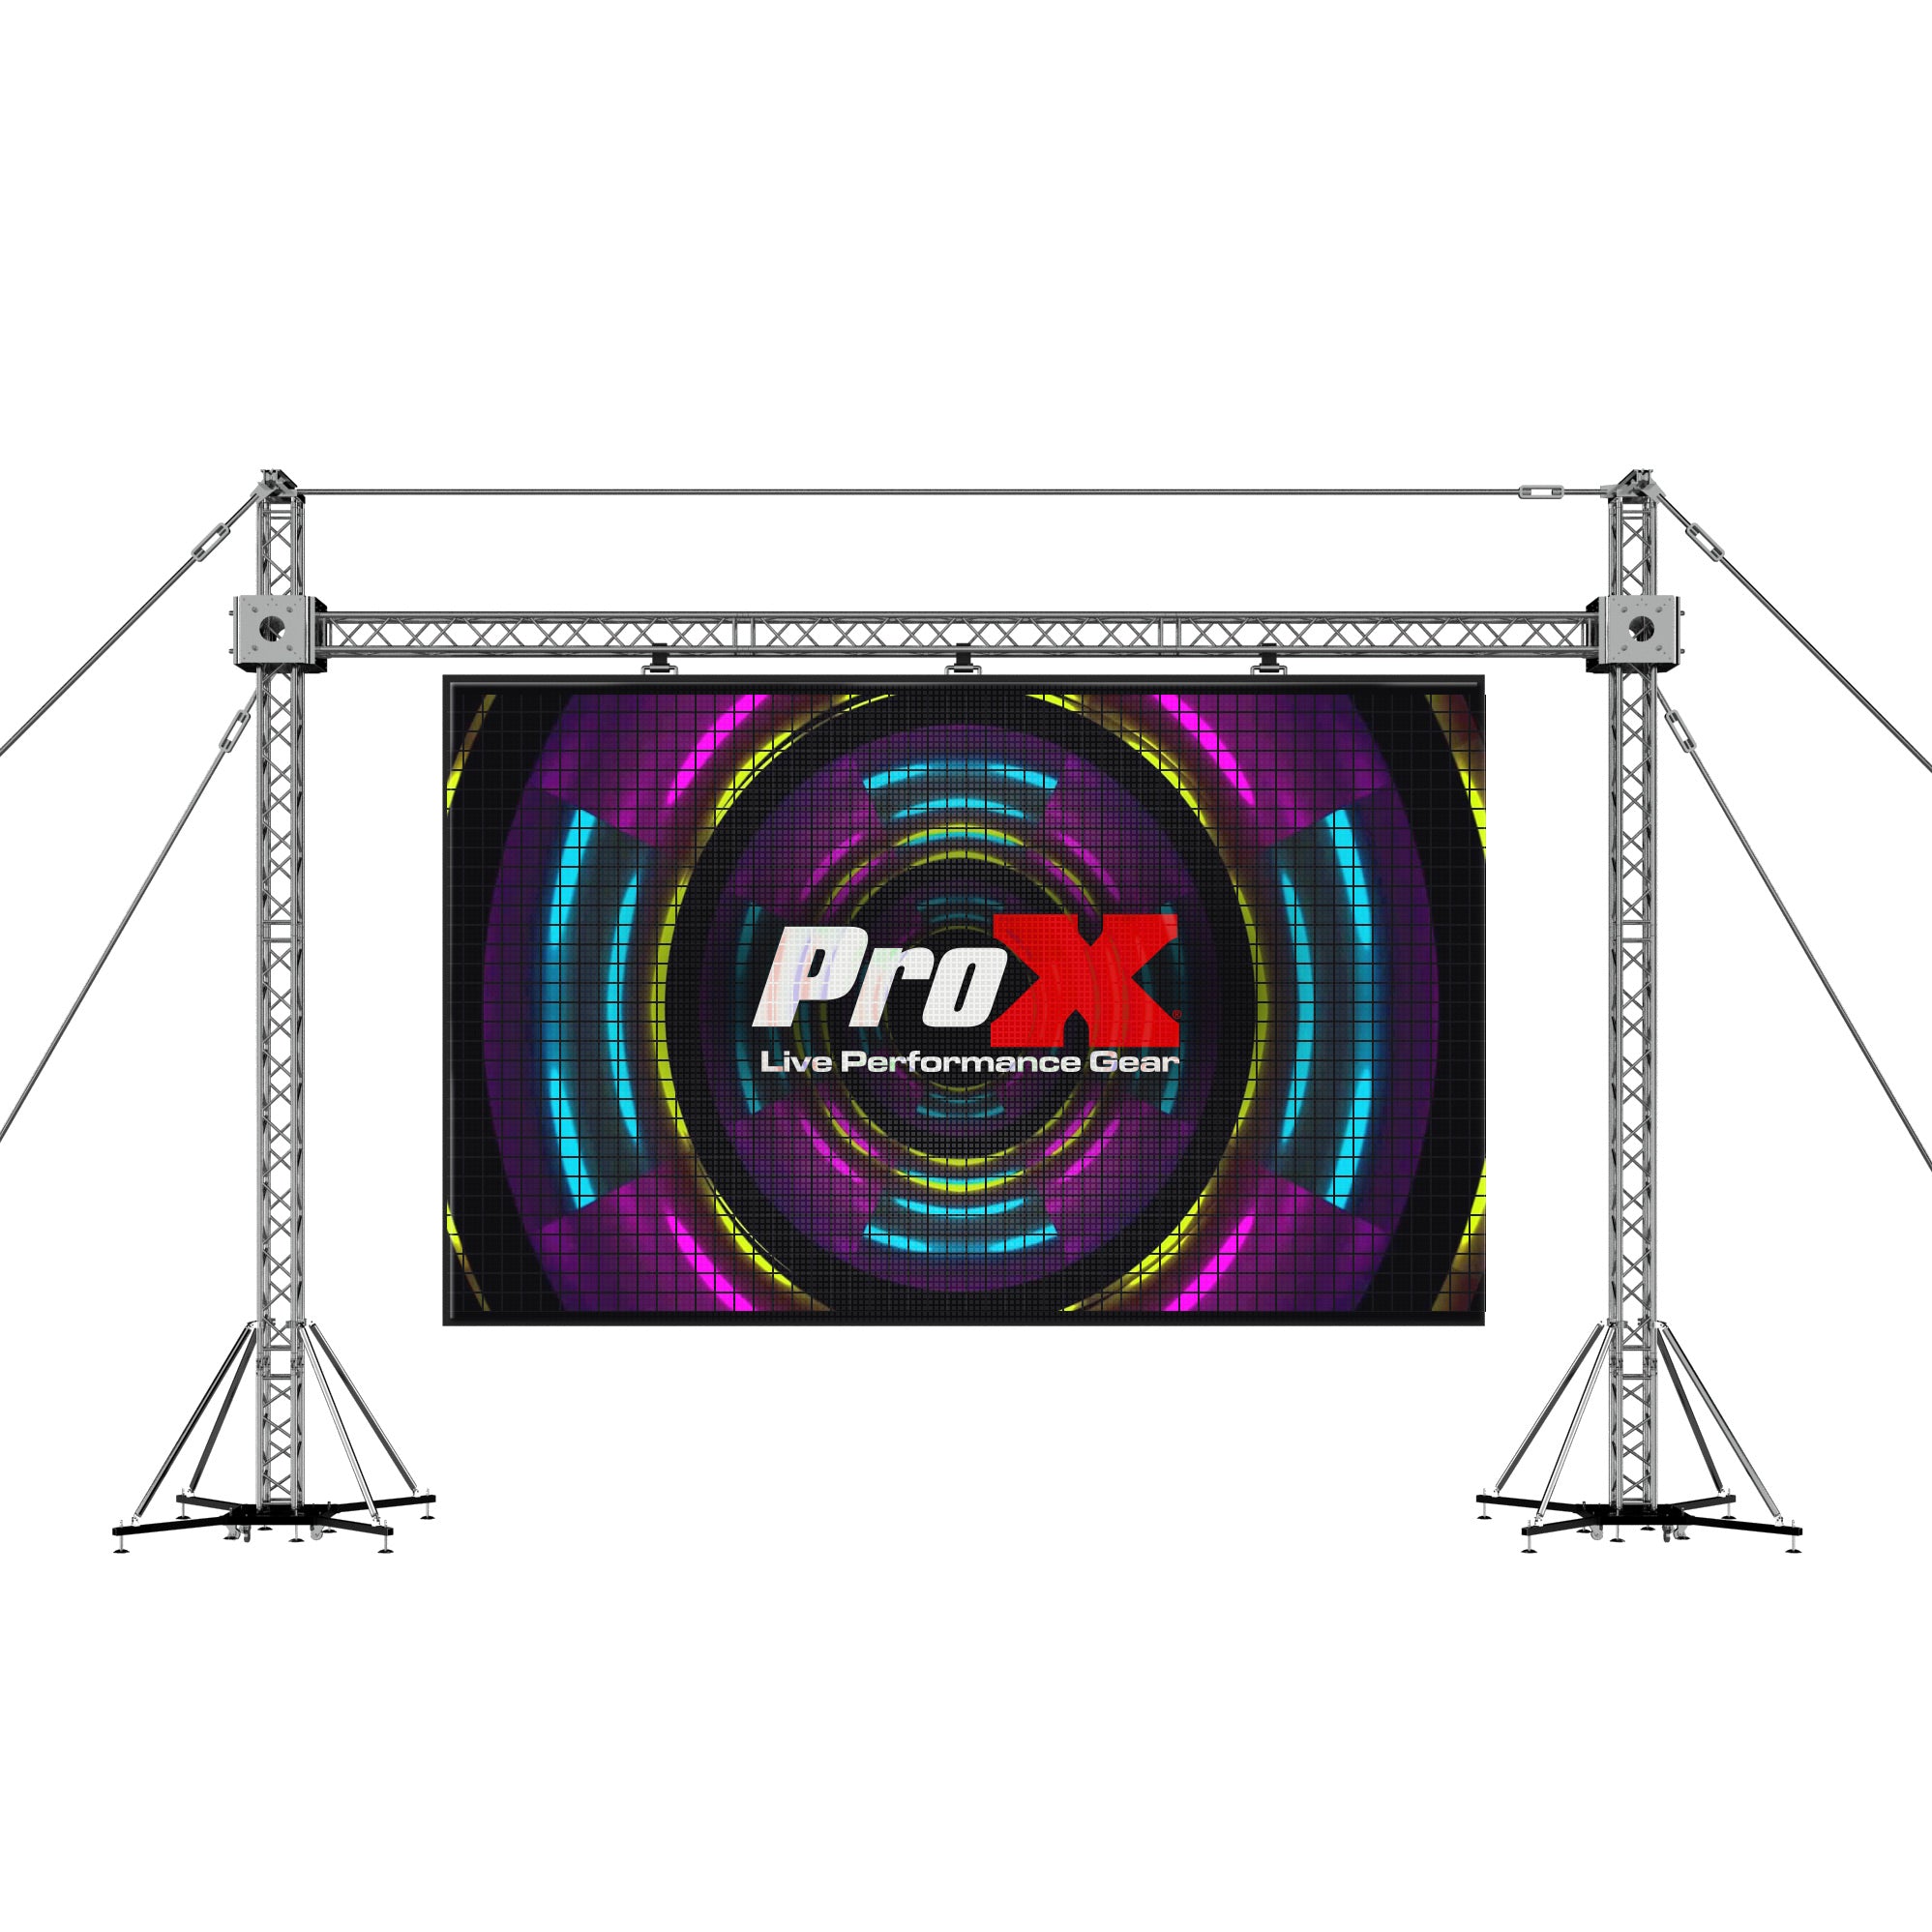 Pro X LED Screen Display Panel Video Fly Wall Truss Ground Support System 30'W x 23'H with Hoist XTP-GS3023